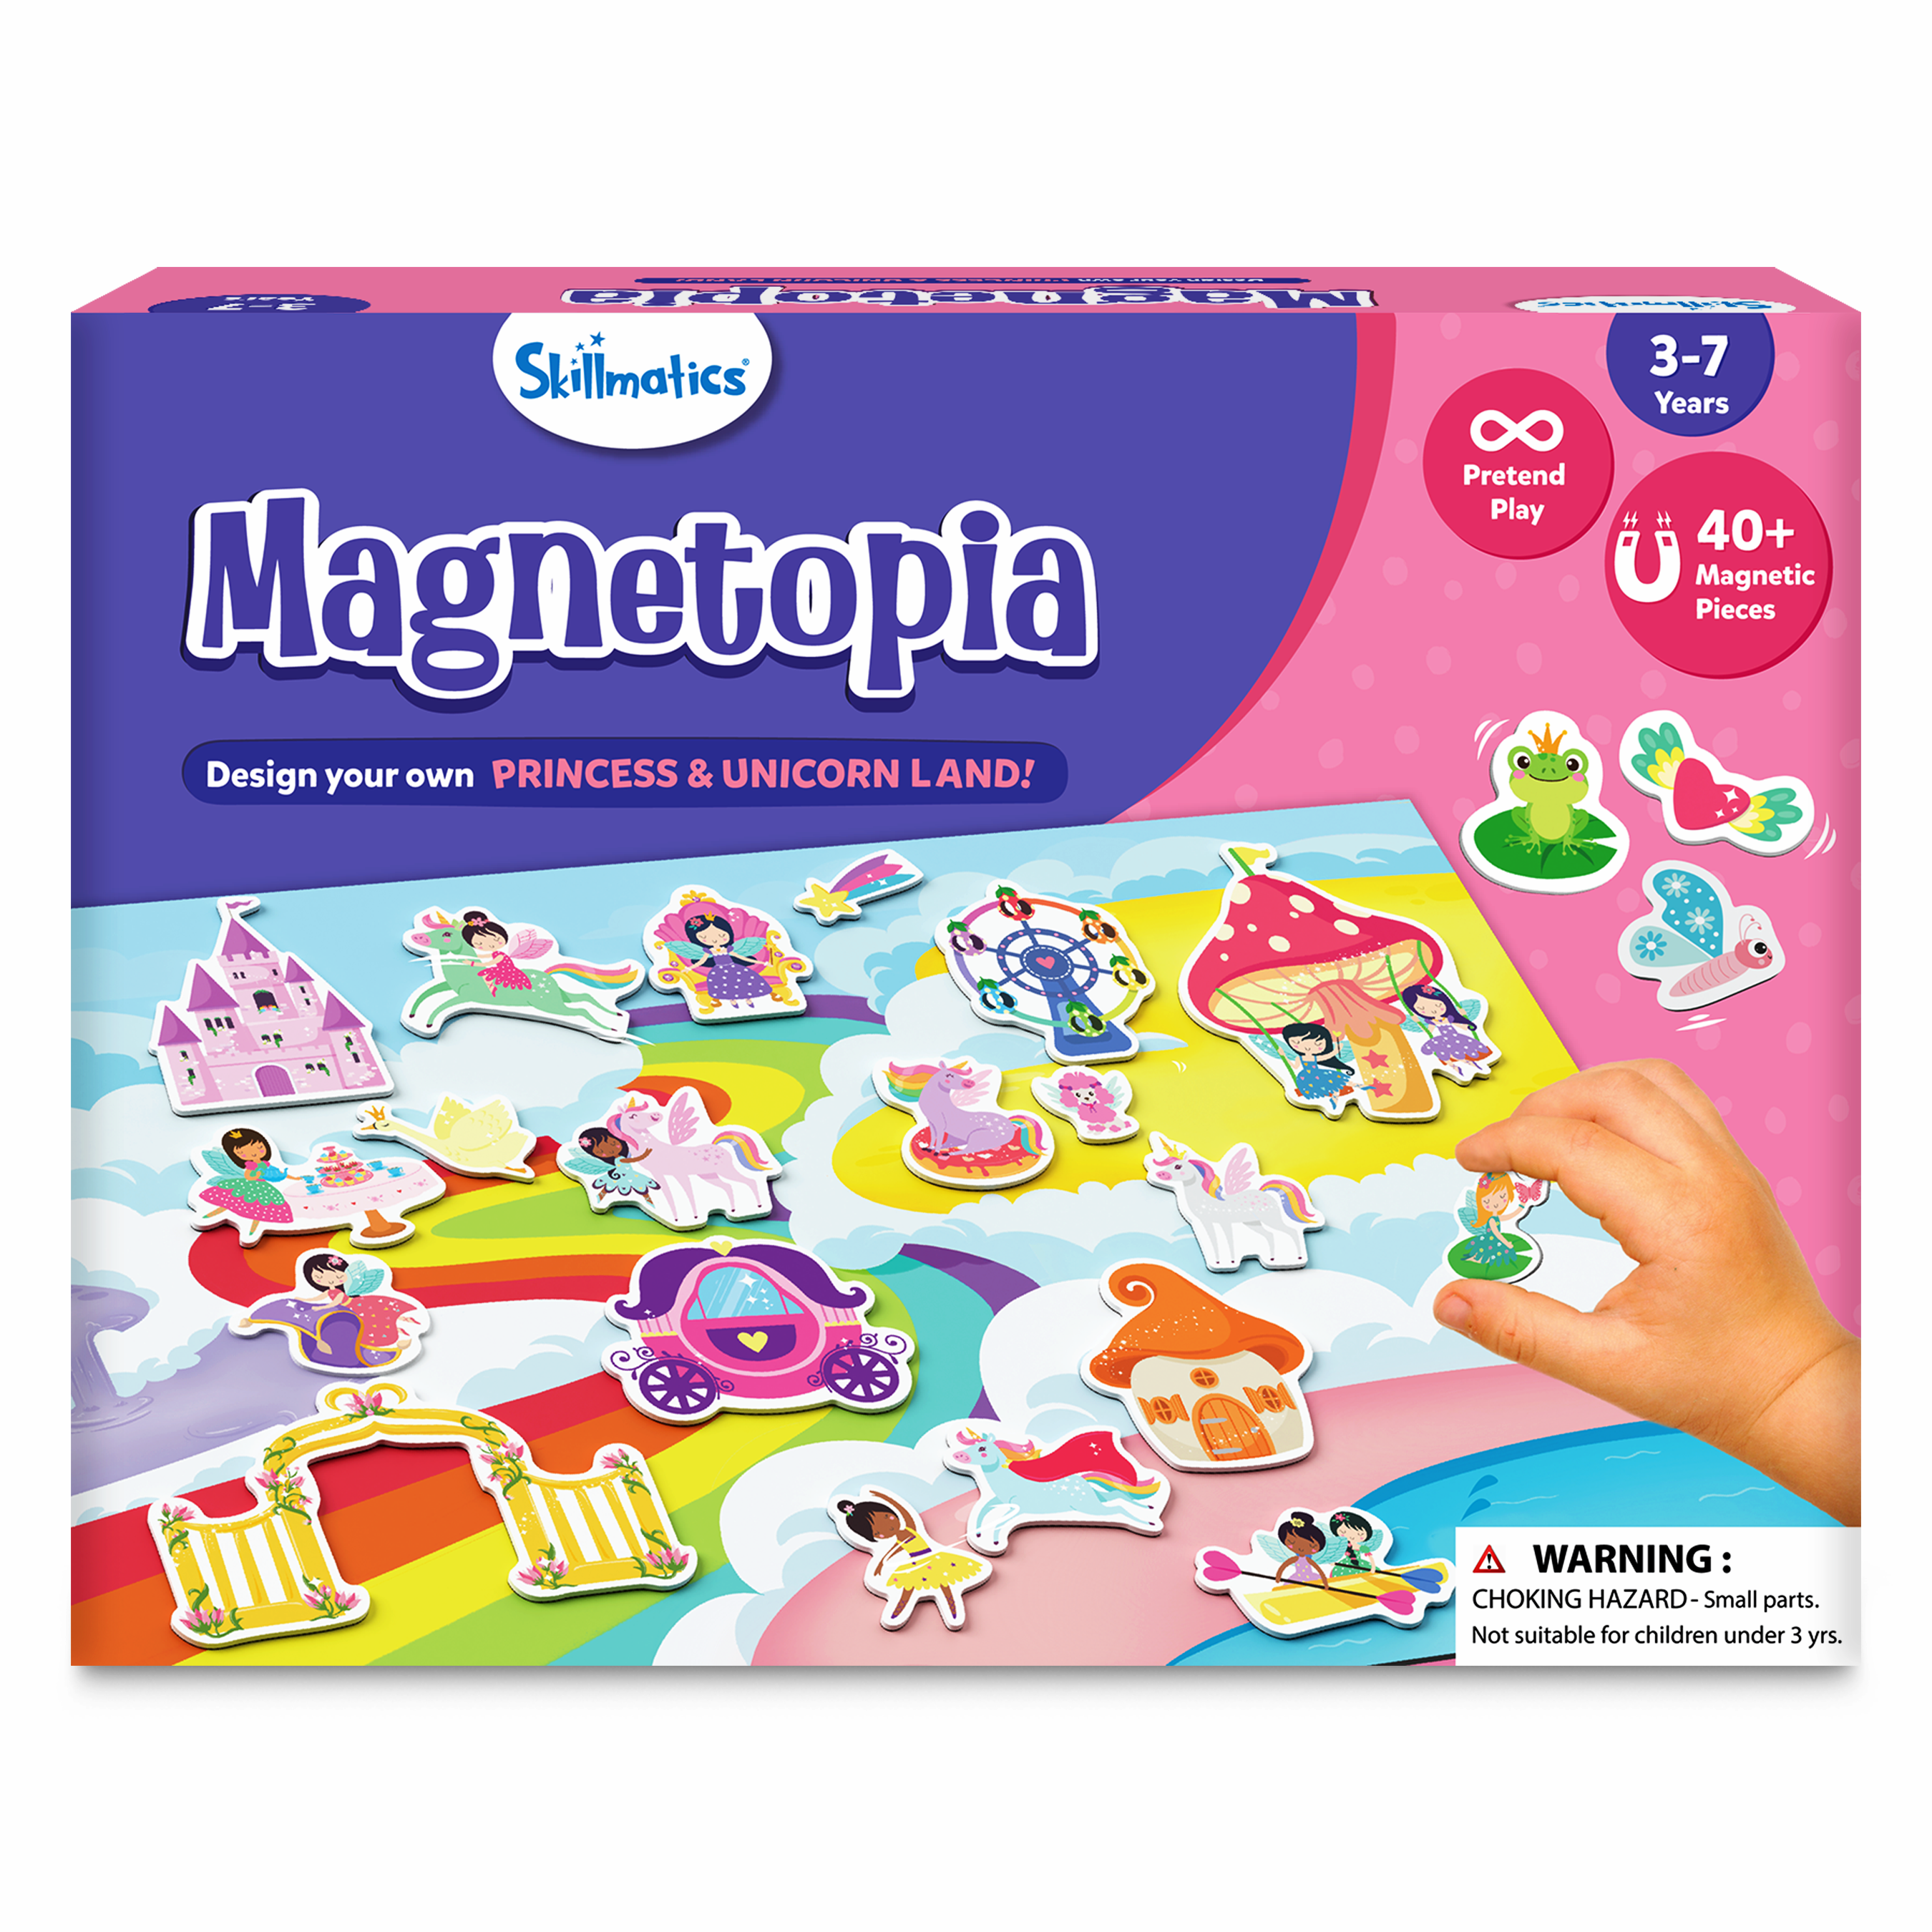 Skillmatics Creative Toy Magnetopia - Princess & Unicorn Land, Interactive Pretend Play Set for Kids, Toddlers, 40+ Magnetic Pieces, Preschool Learning Game, Gifts for Girls & Boys Ages 3, 4, 5, 6, 7